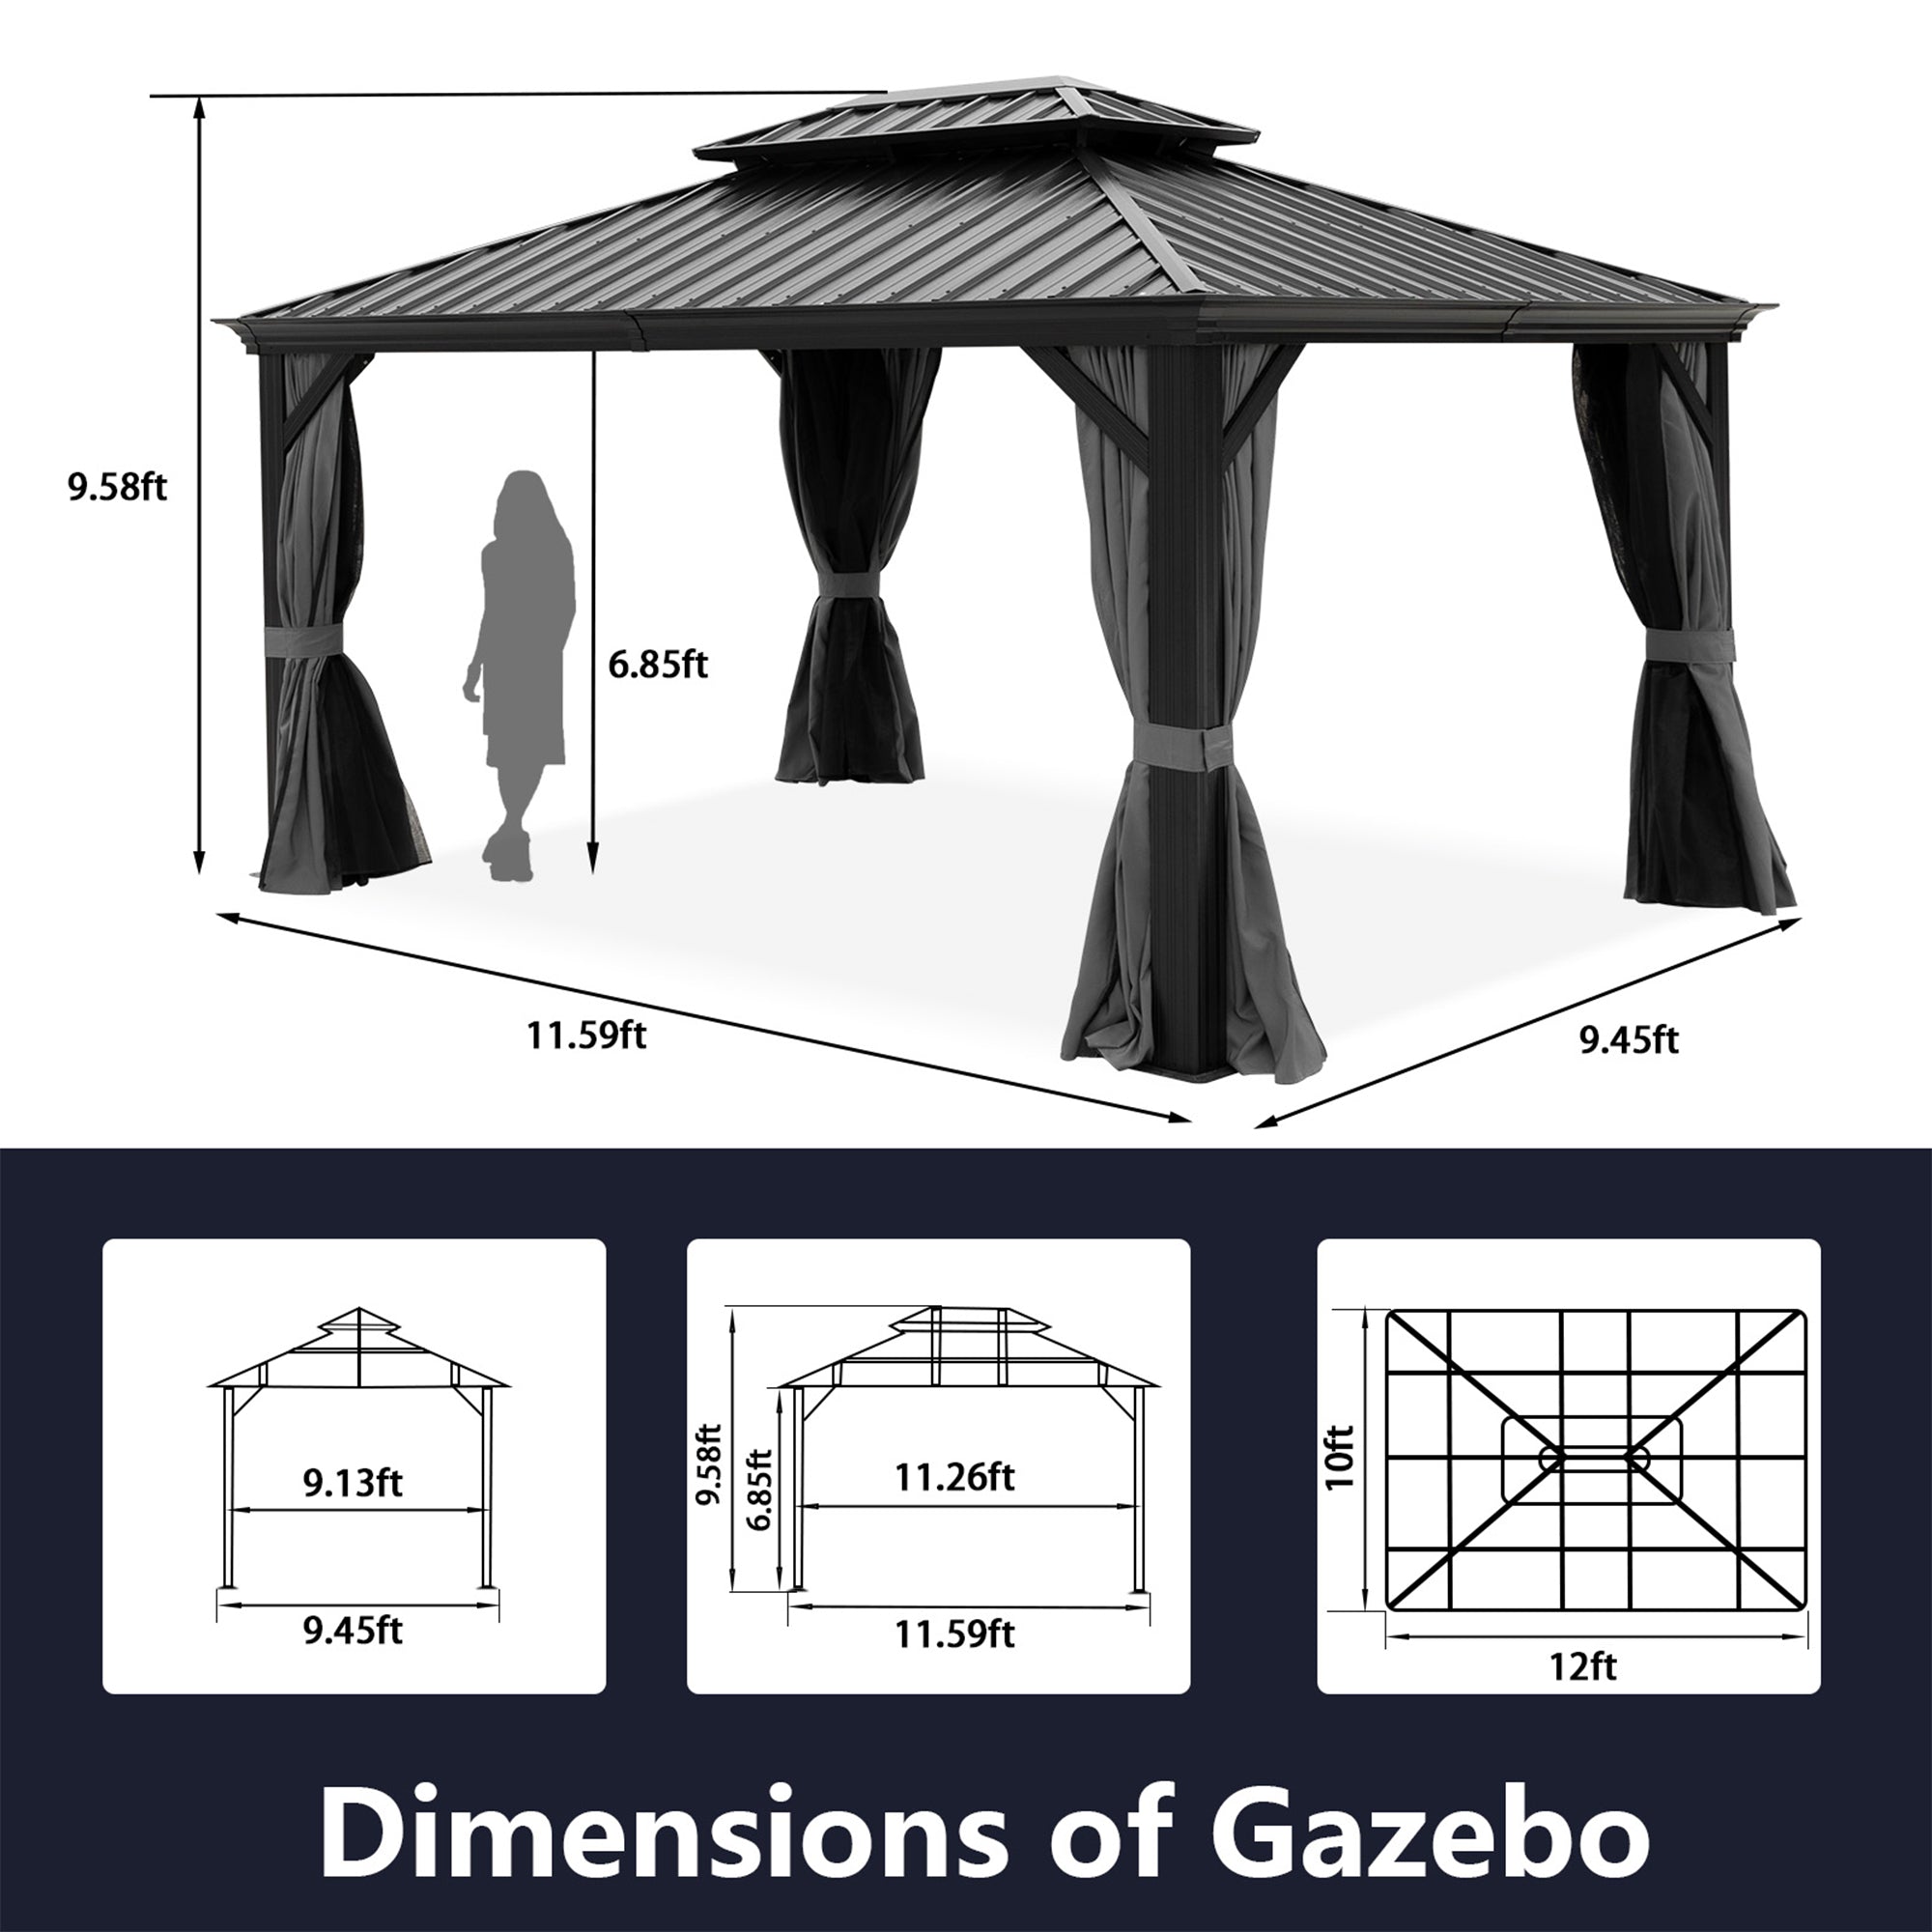 10 ft. x 12 ft. Aluminum Alloy Outdoor Patio Hardtop Gazebo with Netting and Curtain